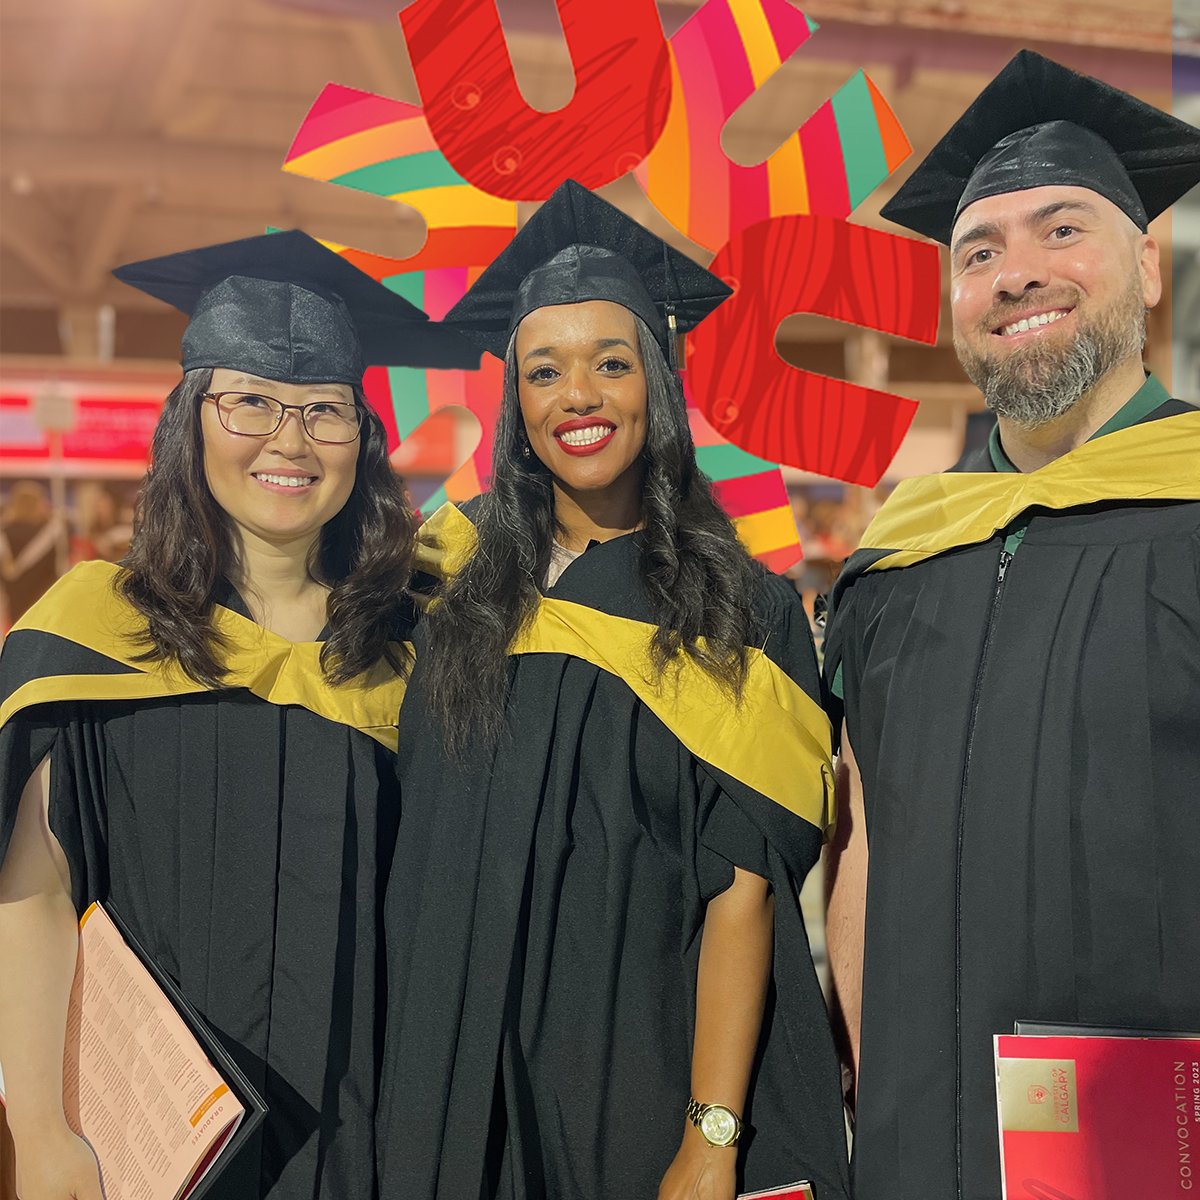 Thinking about your MSW this year? Applications open August 14. Advance your career or join one of Canada's most needed professions with our unique specializations. Degrees are mostly online with on-campus residencies. bit.ly/3QmK3ny